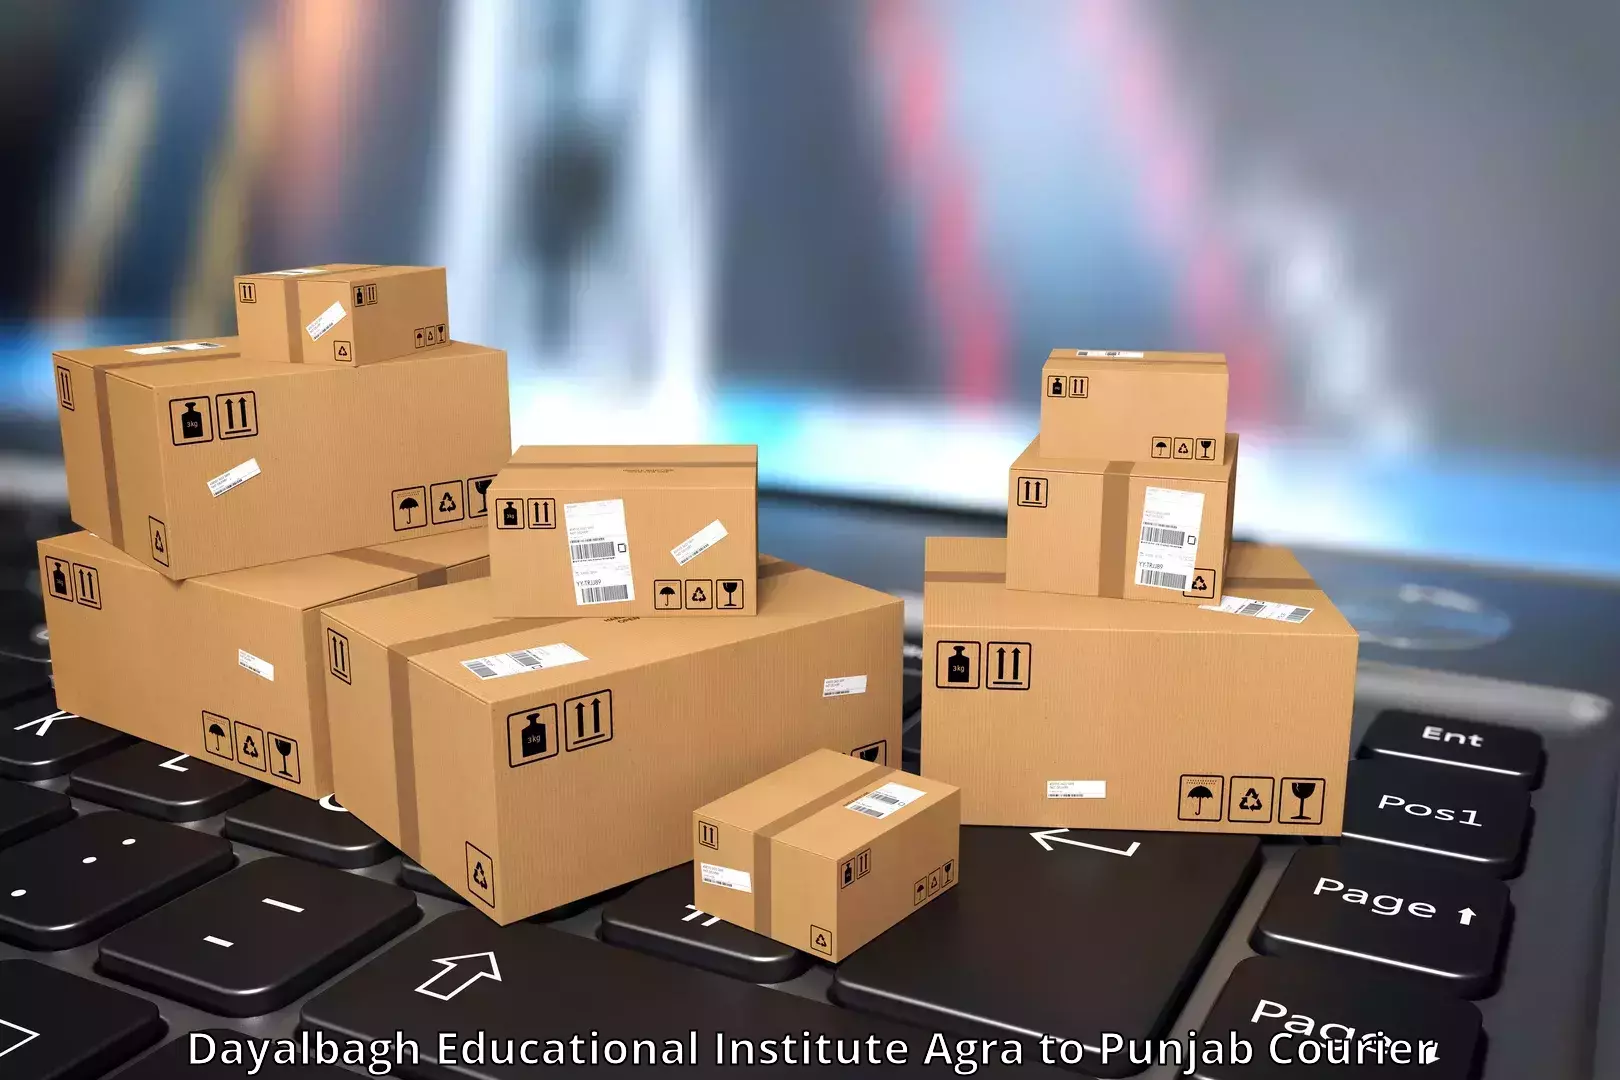 On-demand shipping options Dayalbagh Educational Institute Agra to Faridkot